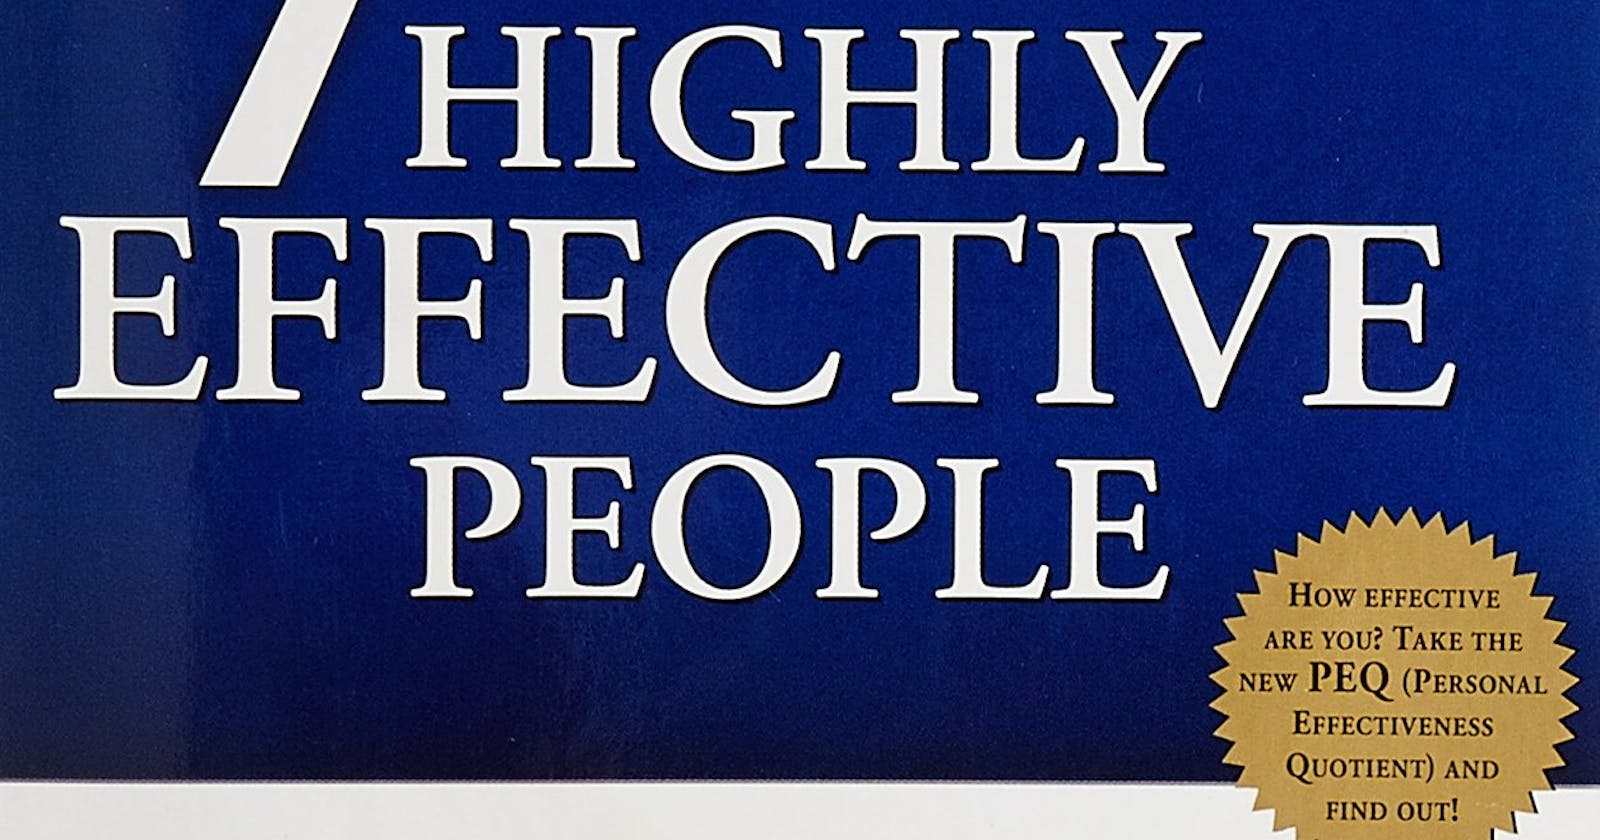 My personal experience reading the seven habits of highly effective people